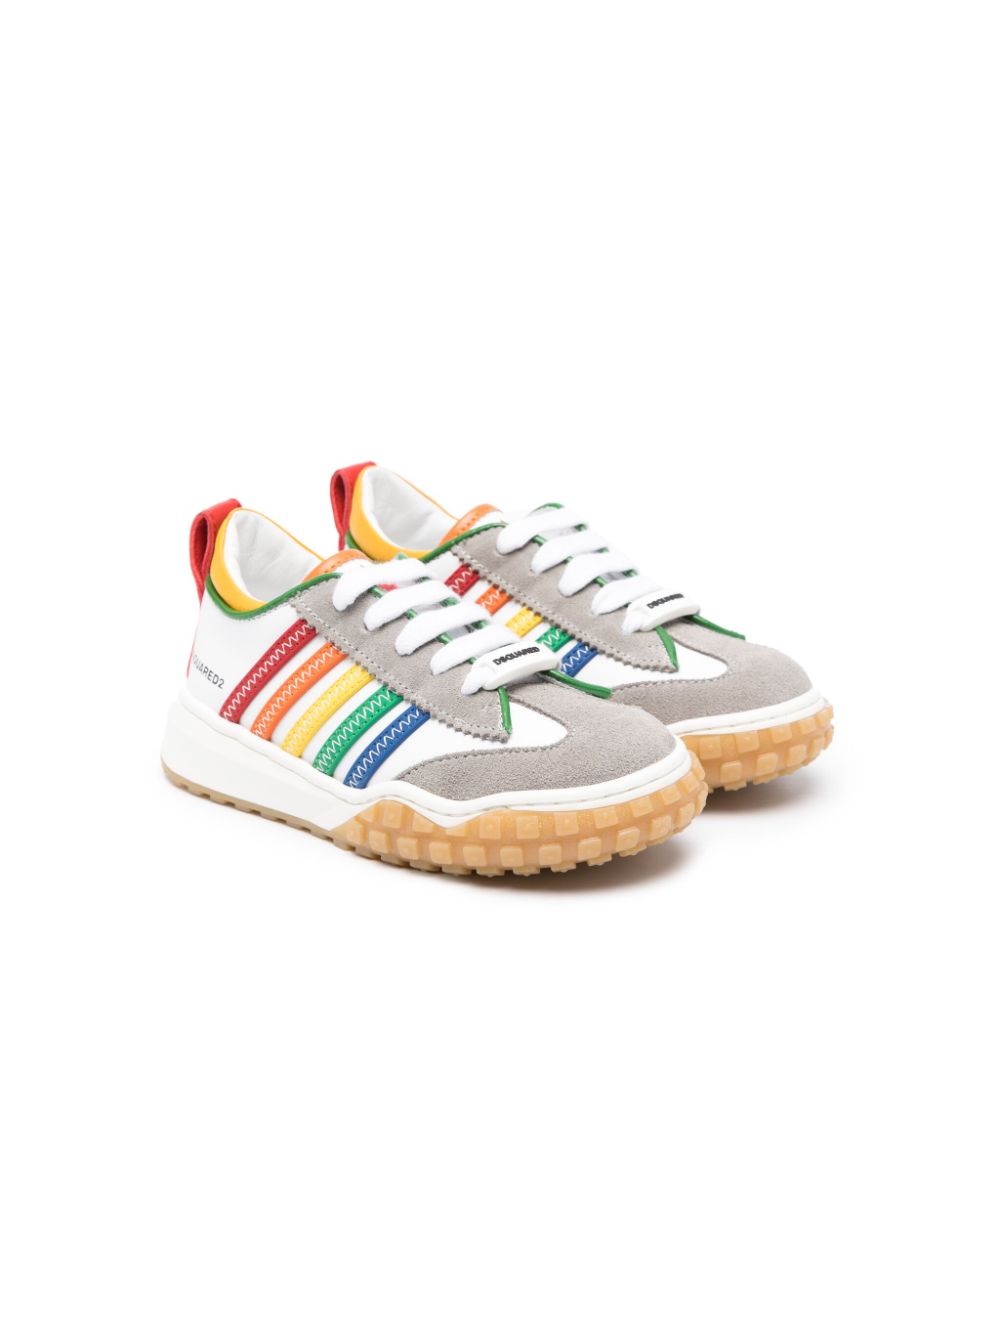 White sneakers with multicolored stripes for children